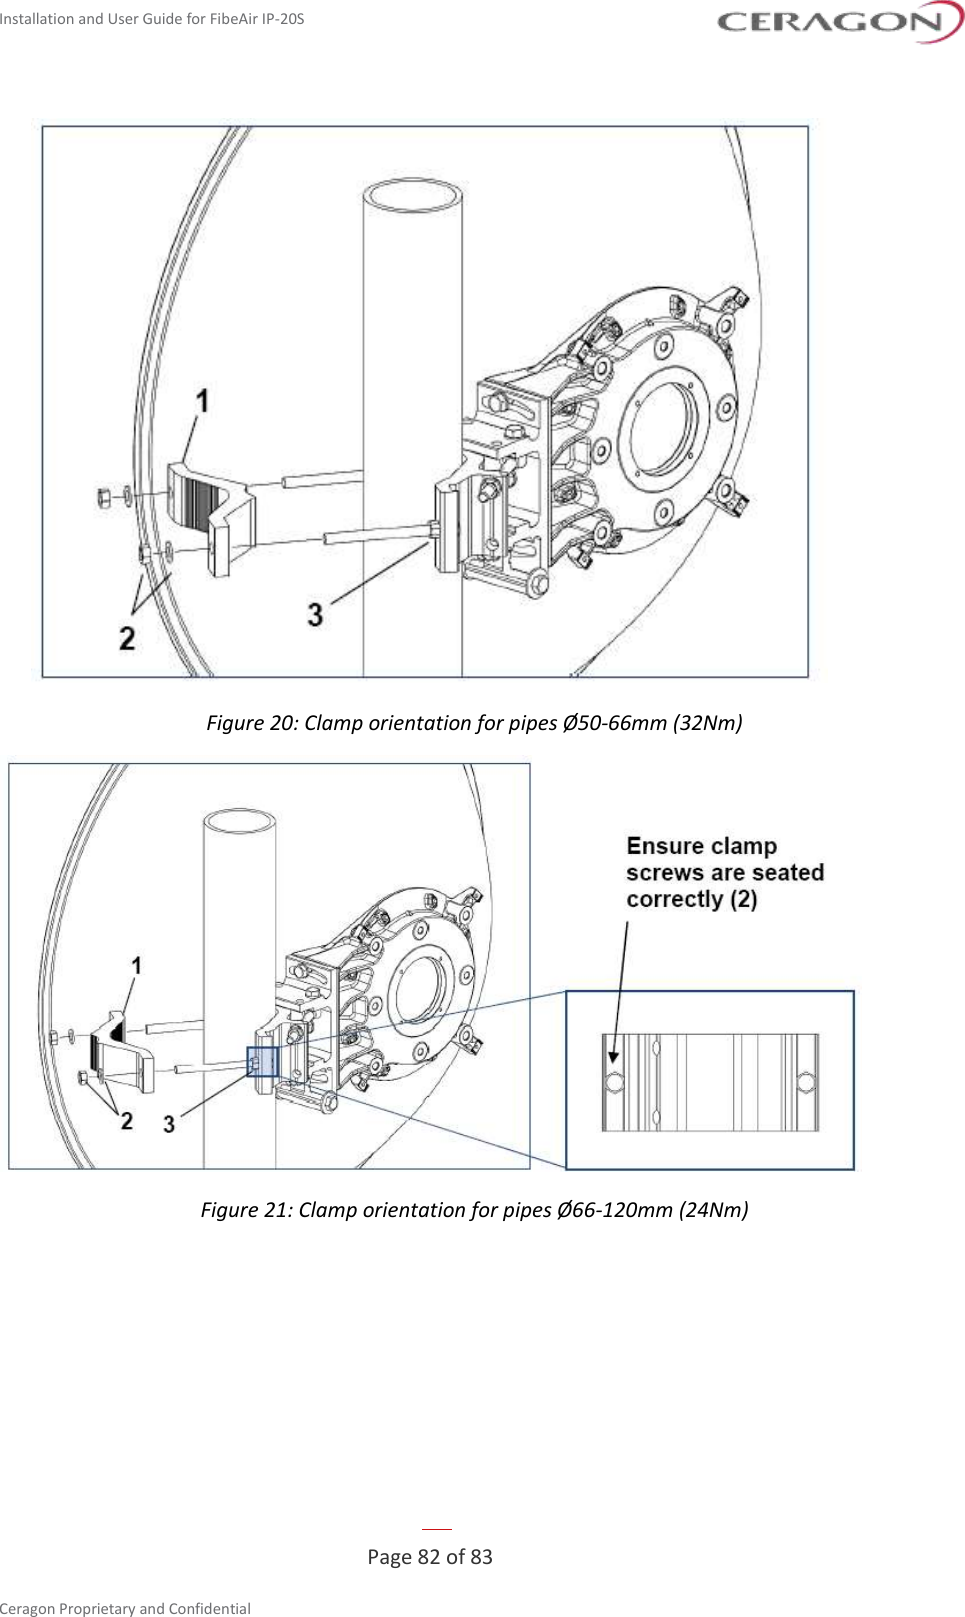 Installation and User Guide for FibeAir IP-20S   Page 82 of 83  Ceragon Proprietary and Confidential      Figure 20: Clamp orientation for pipes Ø50-66mm (32Nm)  Figure 21: Clamp orientation for pipes Ø66-120mm (24Nm) 